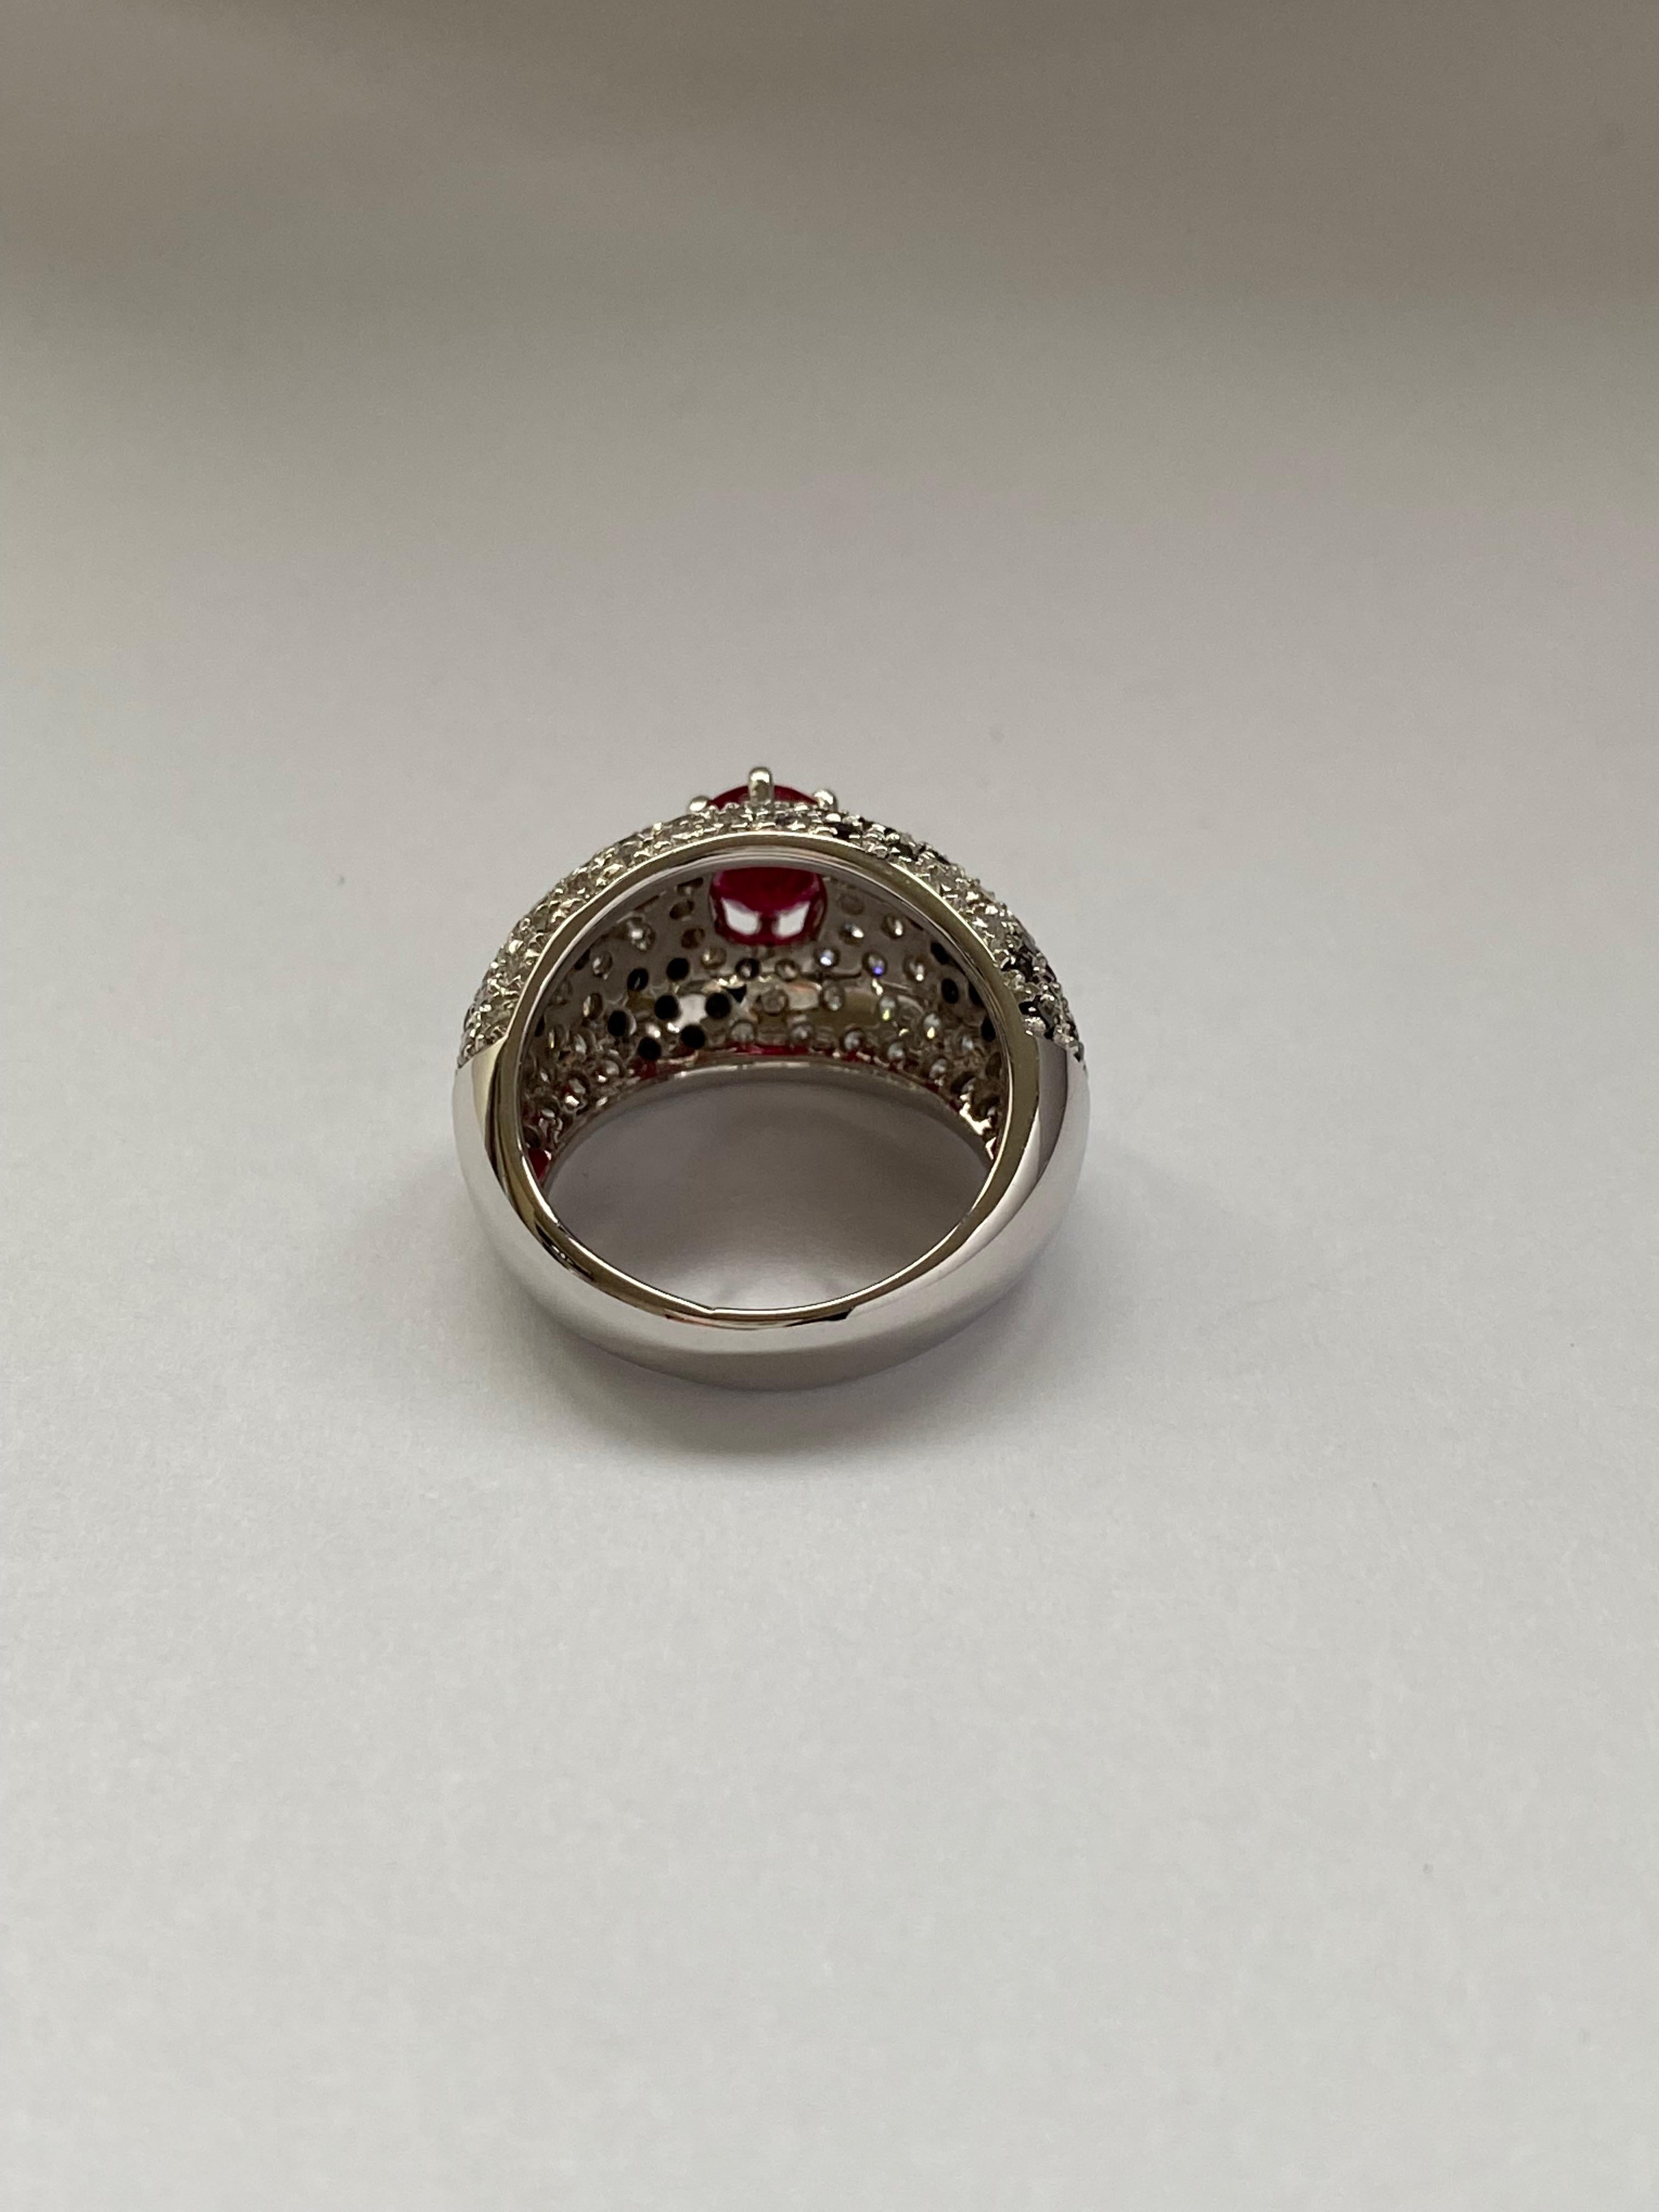 Band Pavè Ring with Natural Ruby, 18kt White Gold, Made in Italy, Vintage In Excellent Condition For Sale In Vicenza, VI